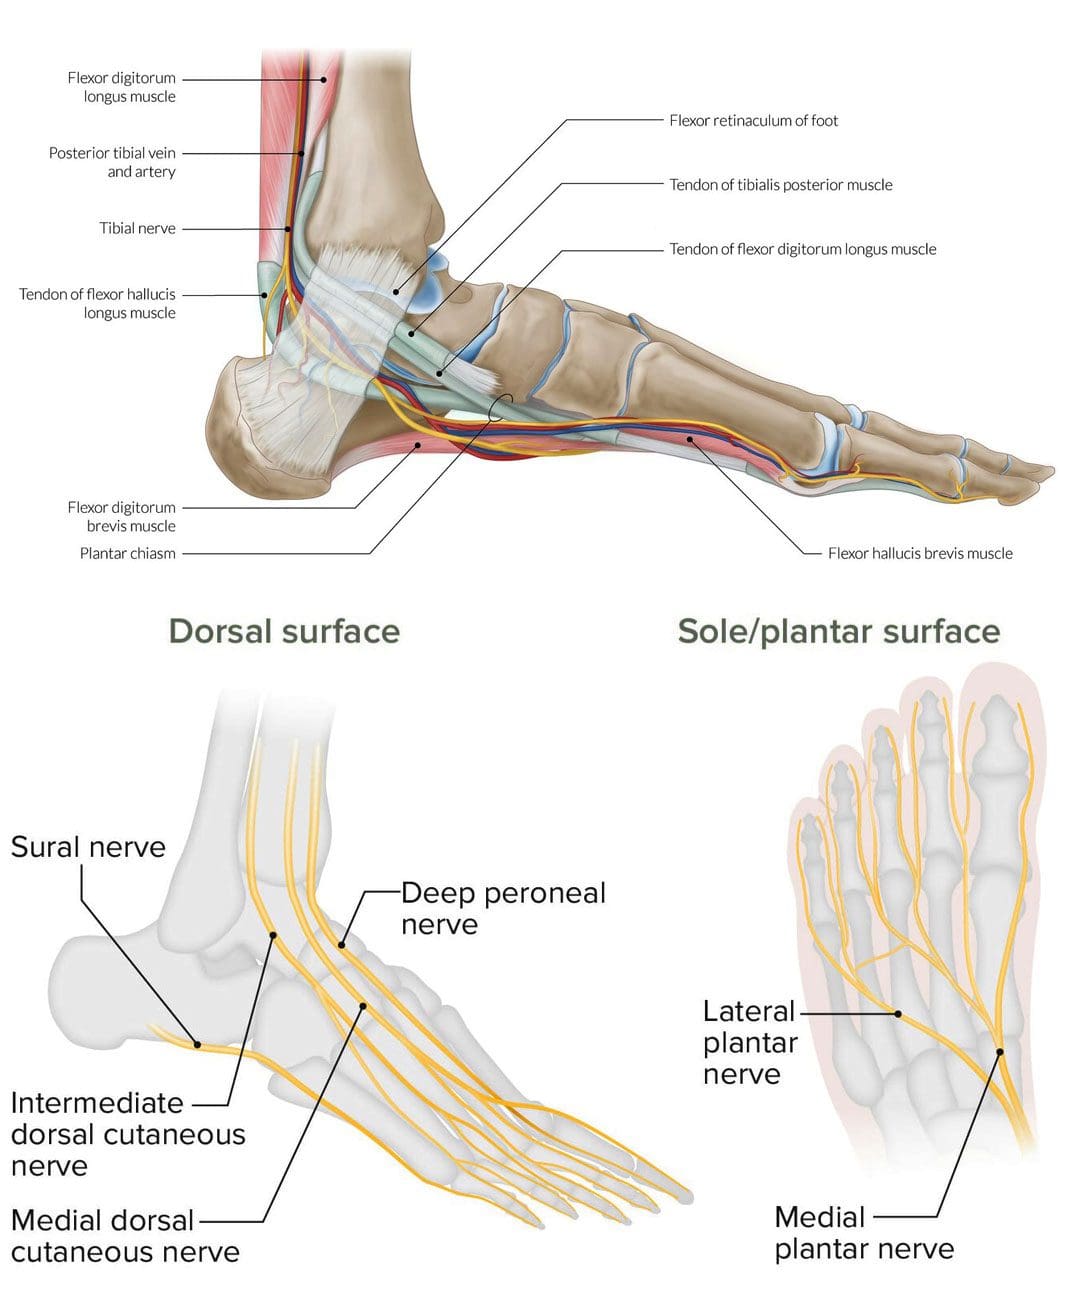 What Causes Nerve Pain In The Foot?